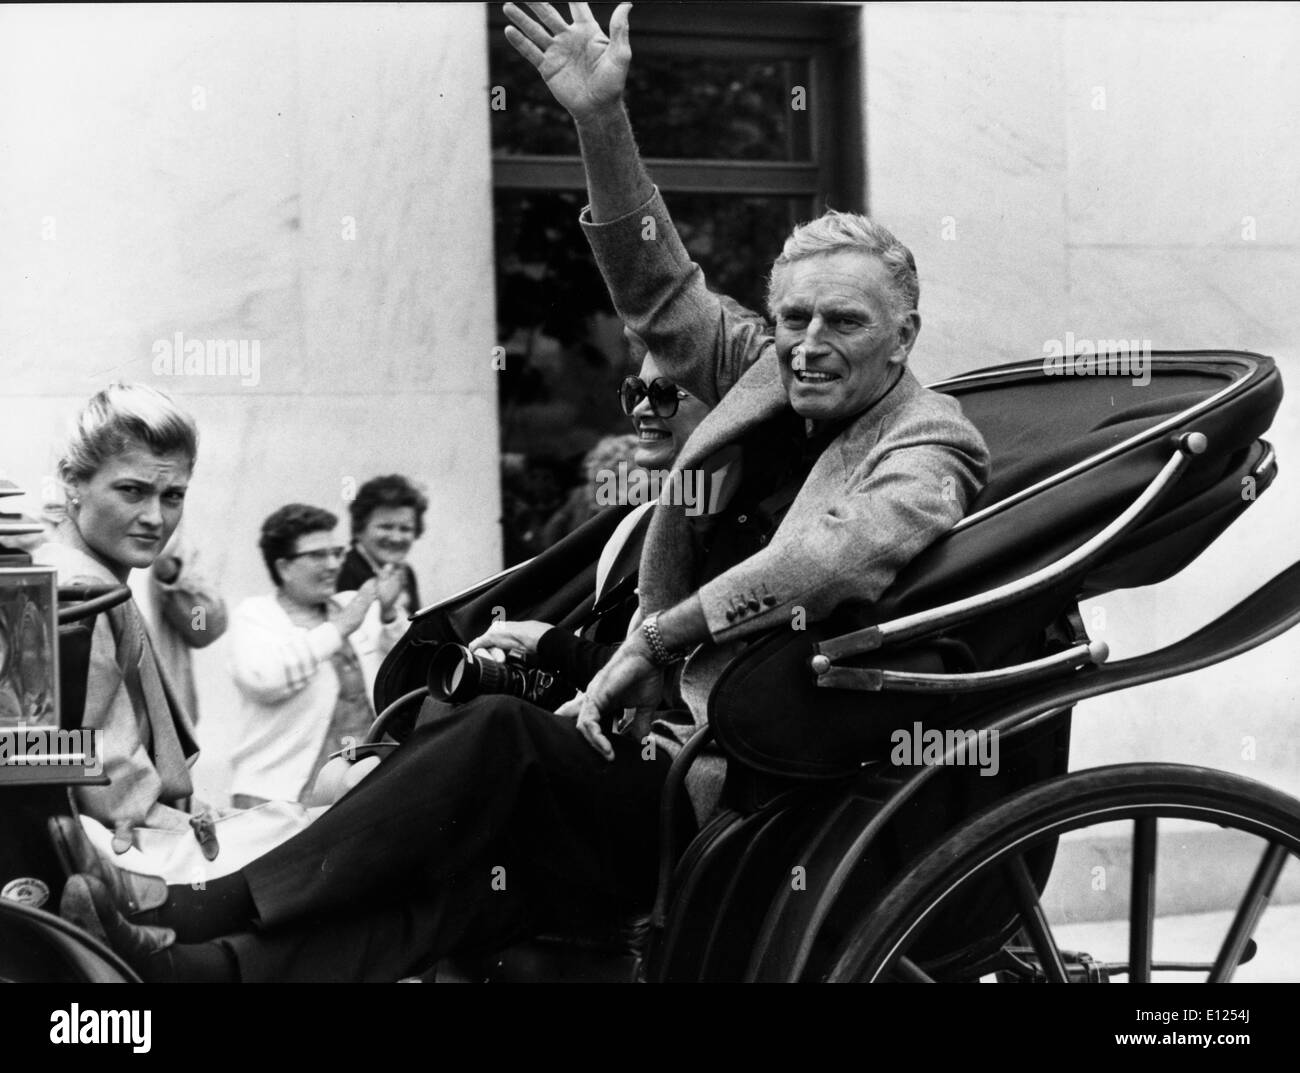 Jun 21, 1991; Como, Italy; Actor CHARLTON HESTON known for his religious roles in 'Ben-Hur' and 'The Ten Commandments', on a coach ride in Como, Italy.. (Credit Image: KEYSTONE Pictures USA/ZUMAPRESS.com) Stock Photo